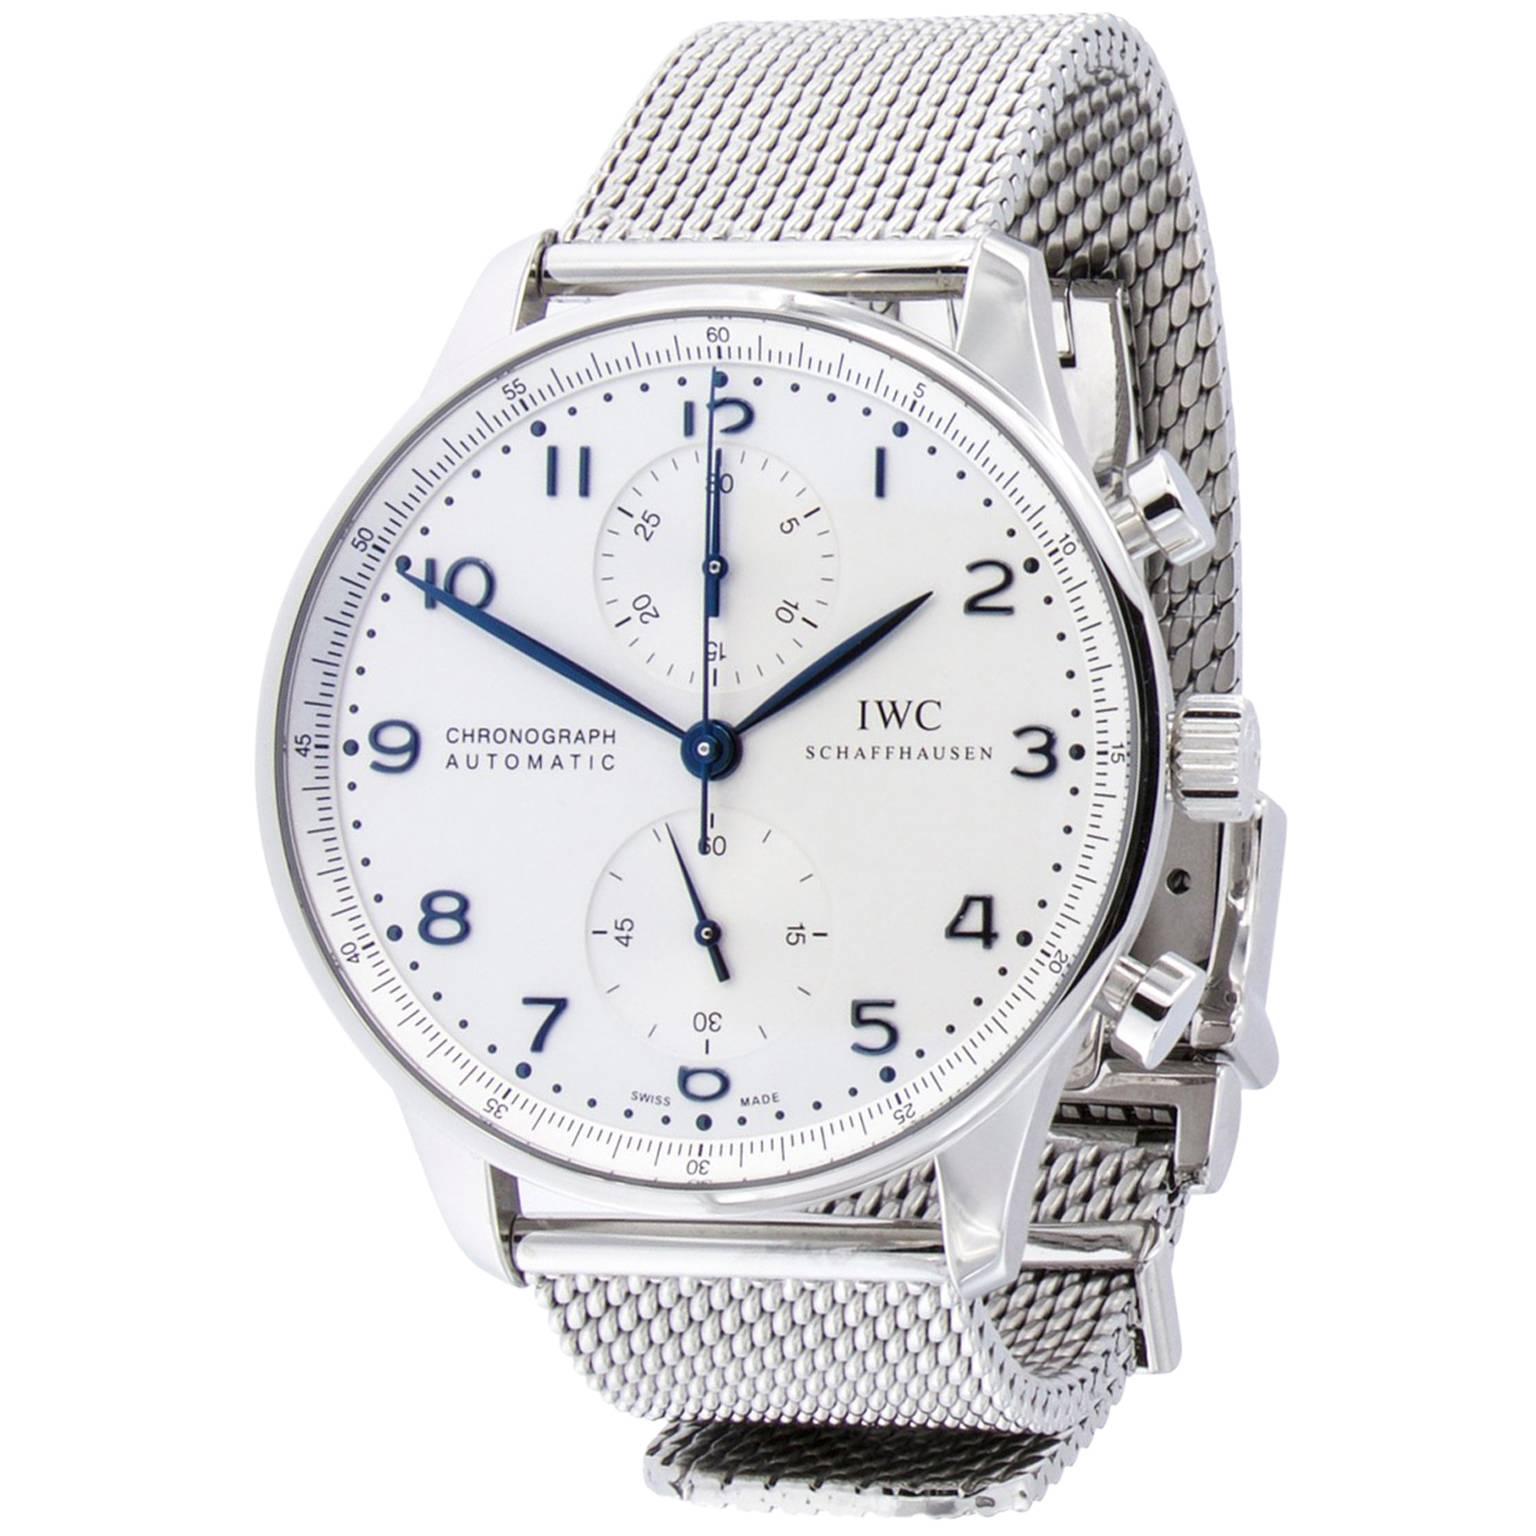 IWC Stainless Steel Portuguese Chronograph Wristwatch